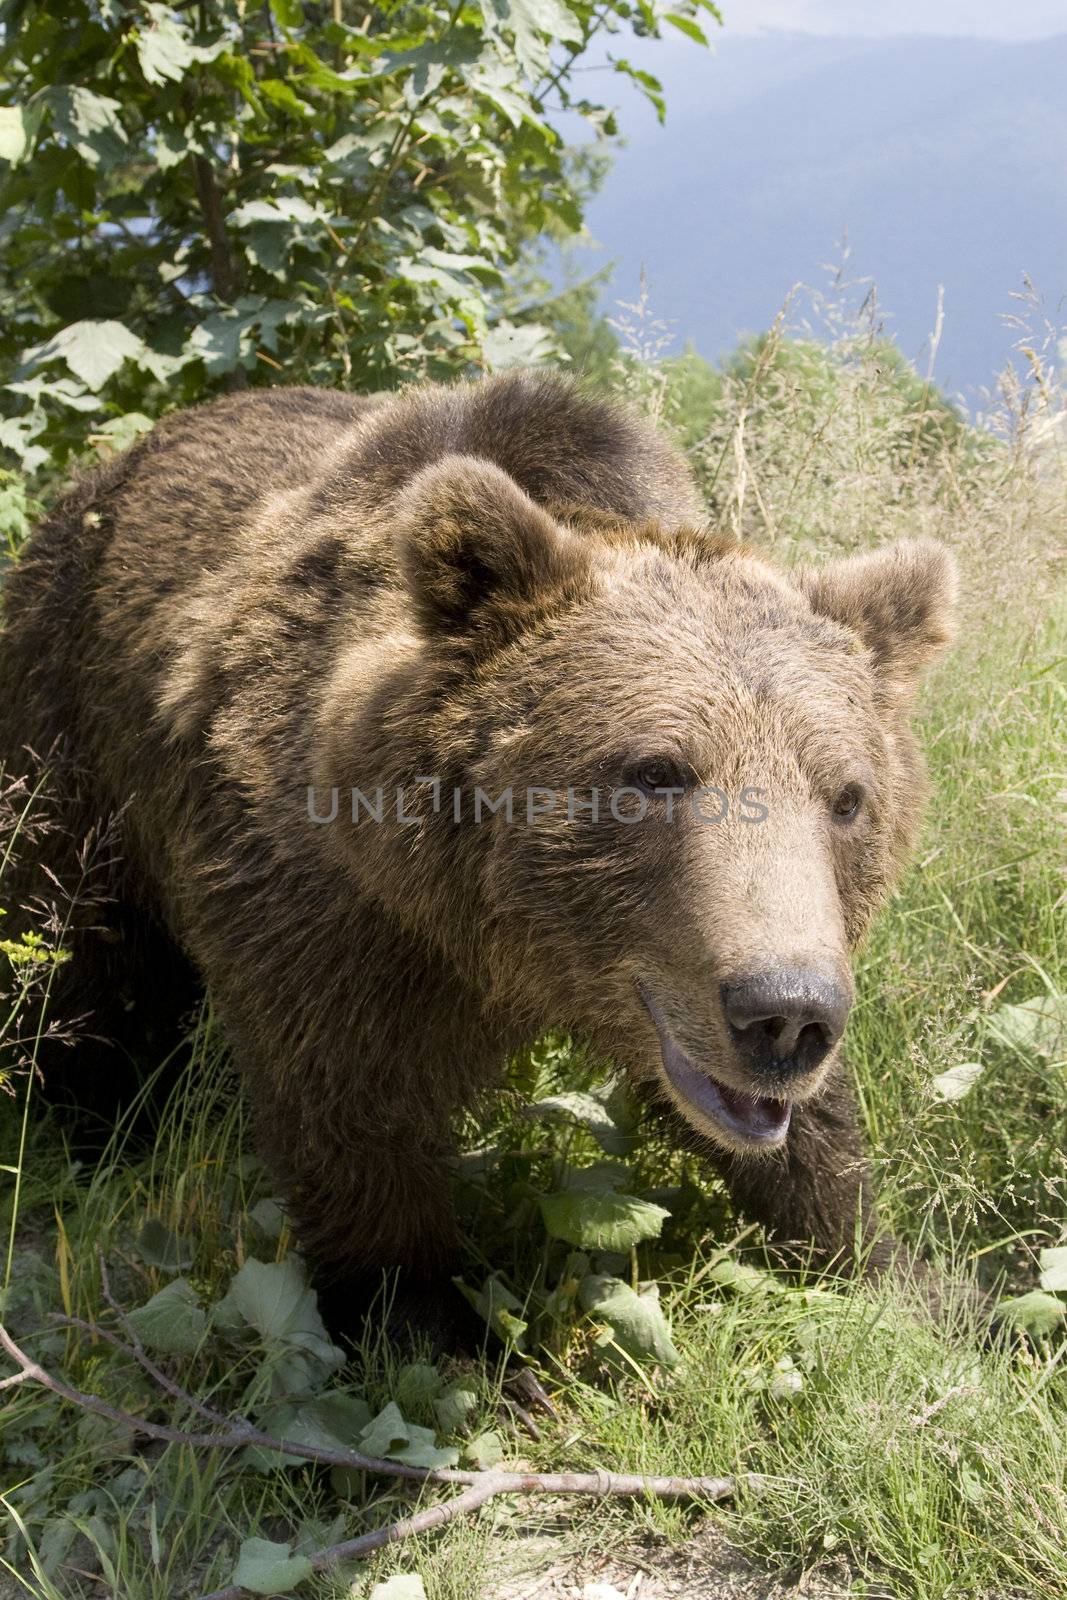 Wild Bear In The Forest by MihaiDancaescu